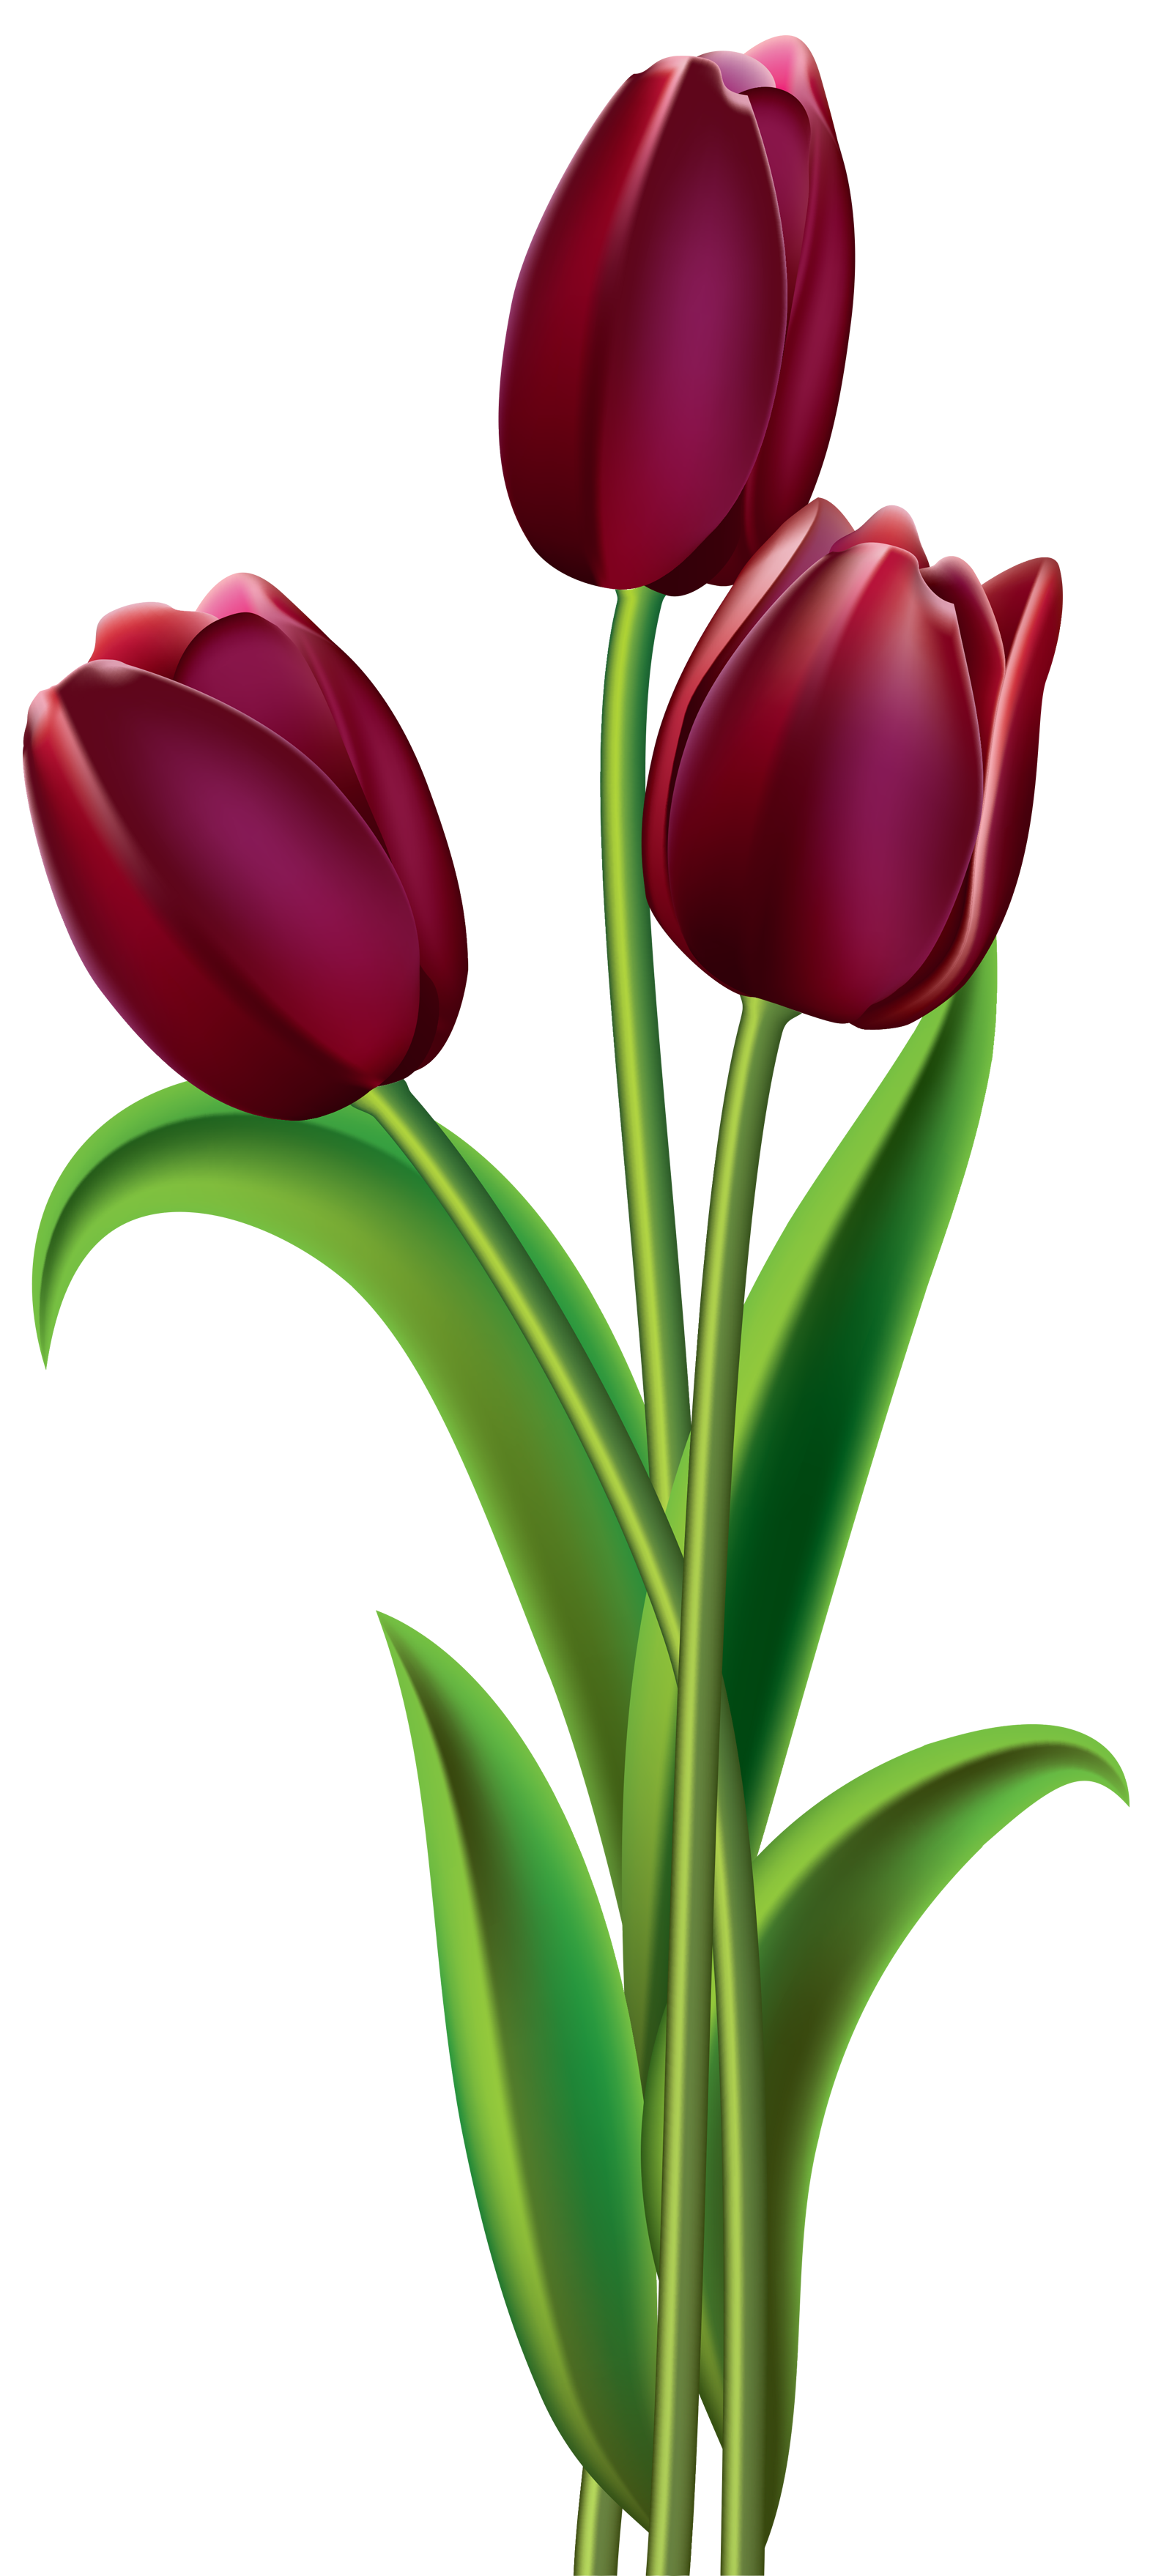 Tulip flower png images free gallery